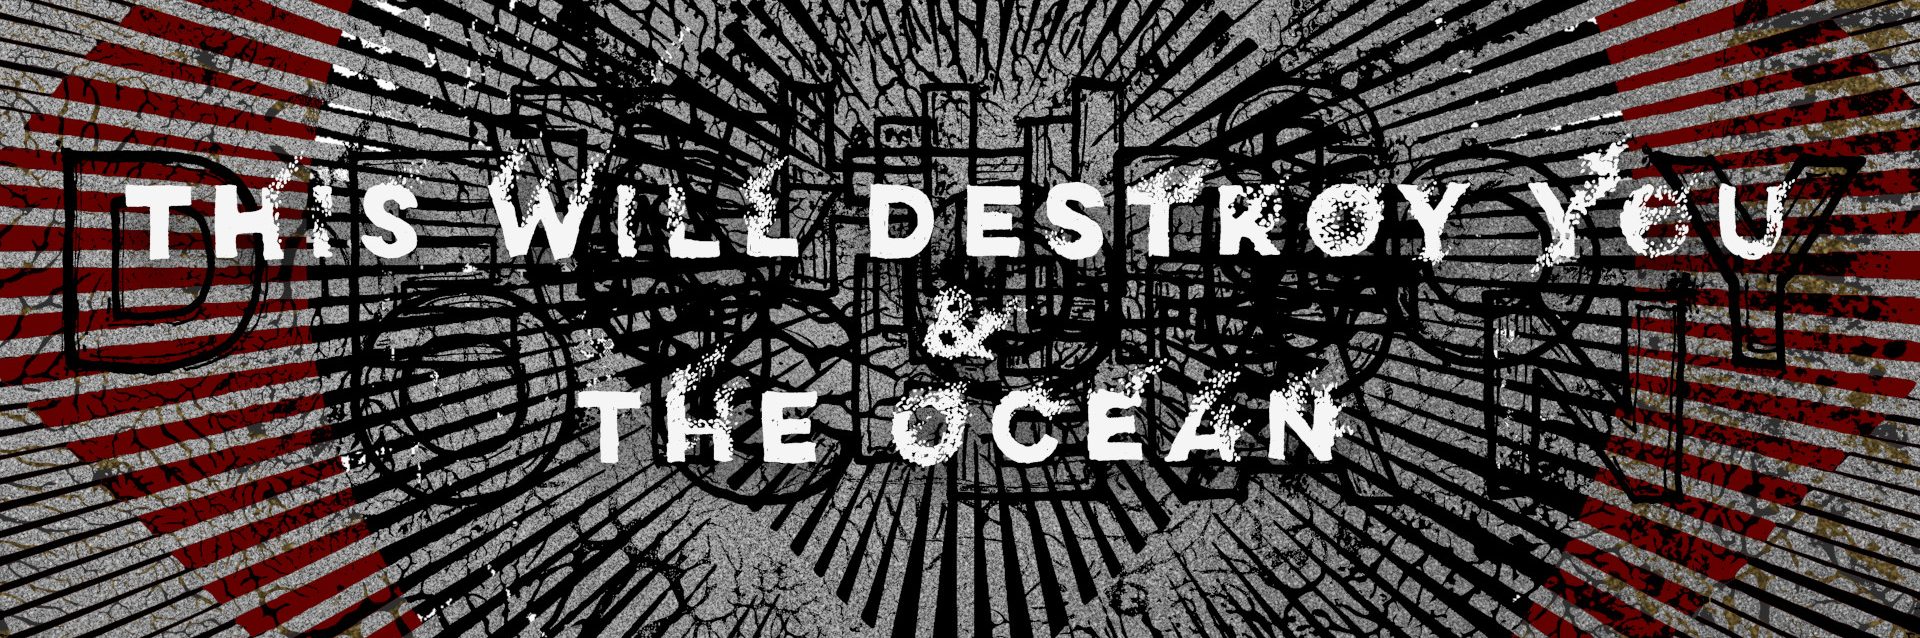 This Will Destroy You x The Ocean